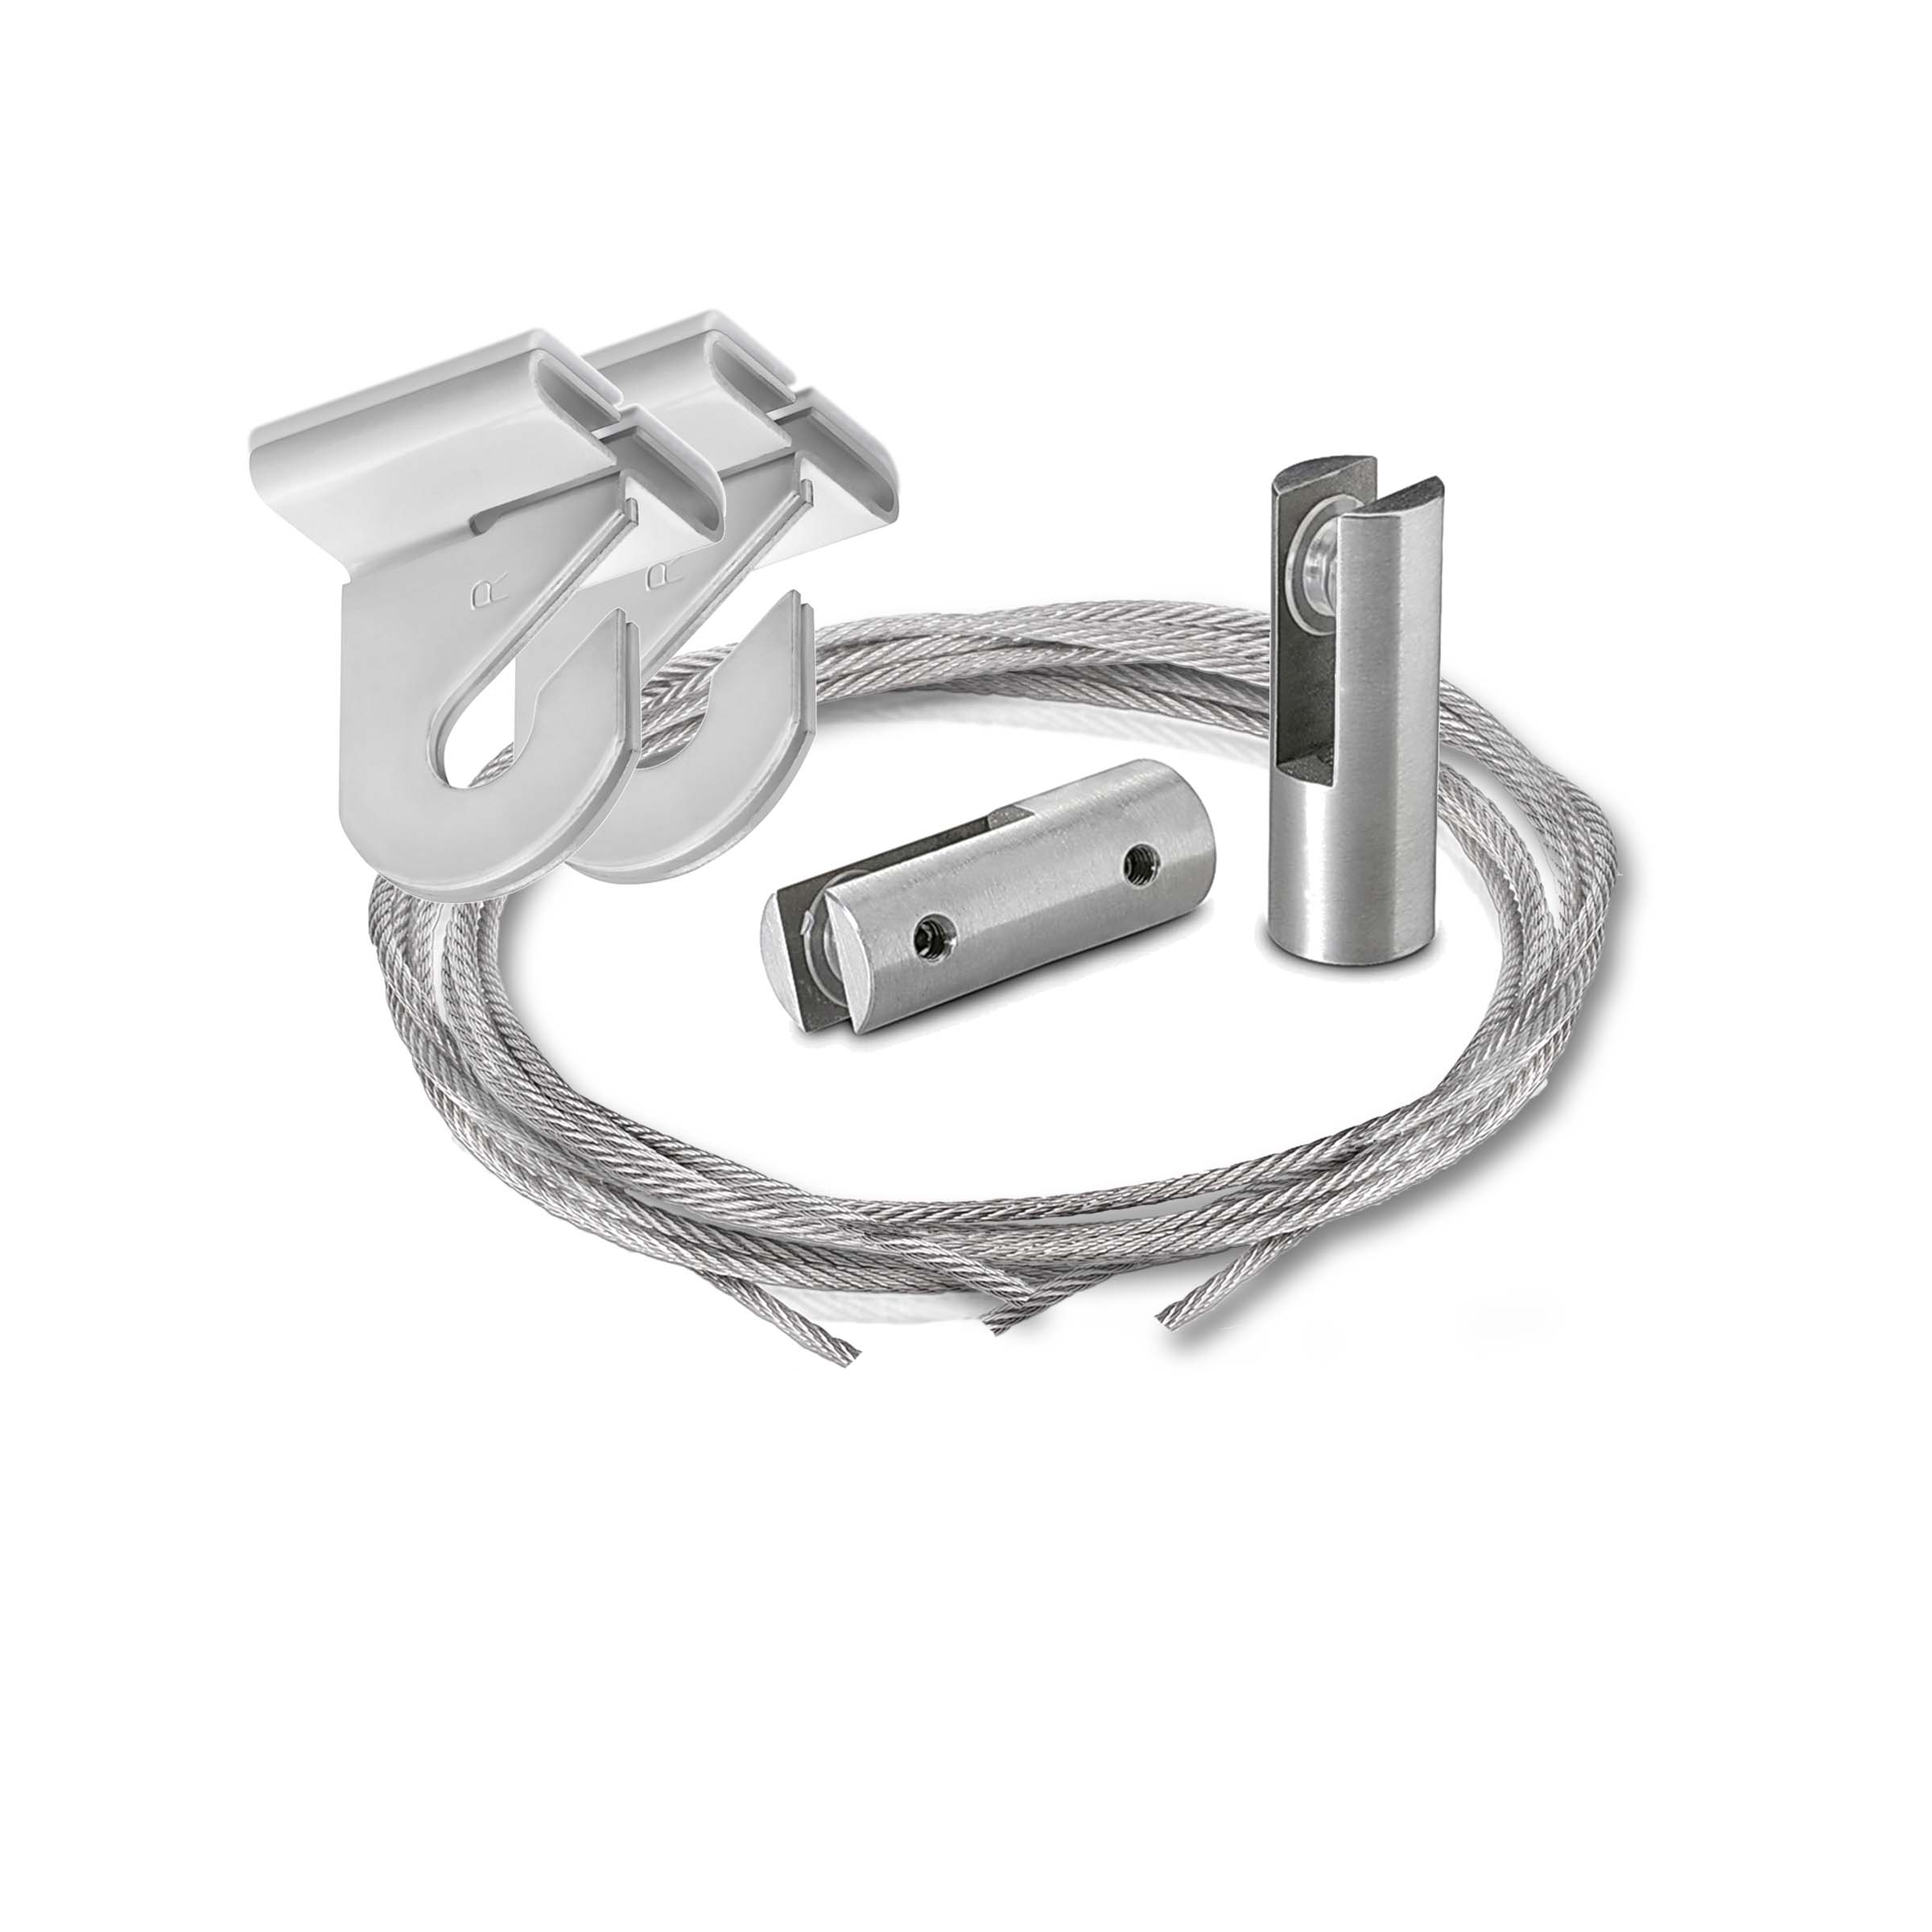 2 Pieces of 72'' Stainless Steel Satin Brushed Suspended Cable Kits for 1/4'' Thick Material (2 Full Sets) - 1/16'' Diameter Cable